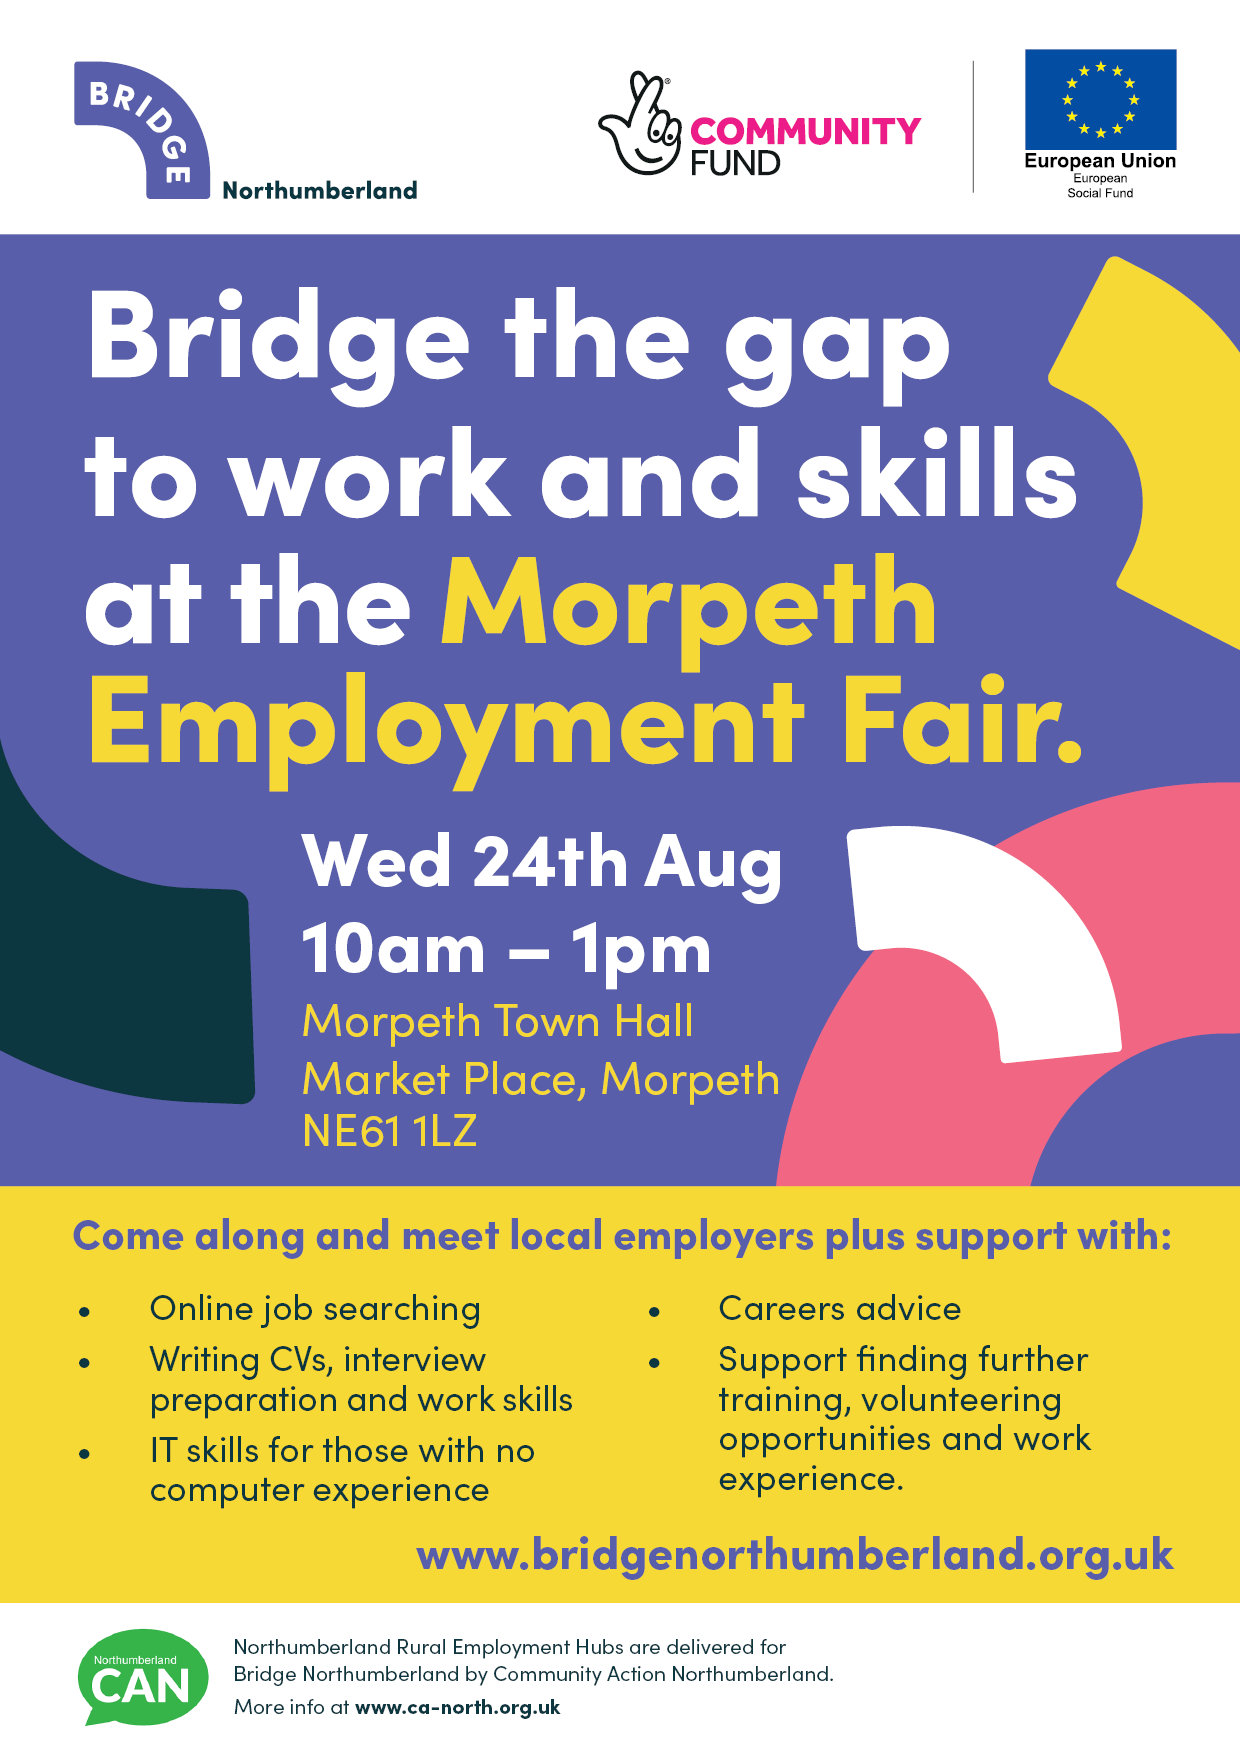 Morpeth Employment Fair 24 August featured image